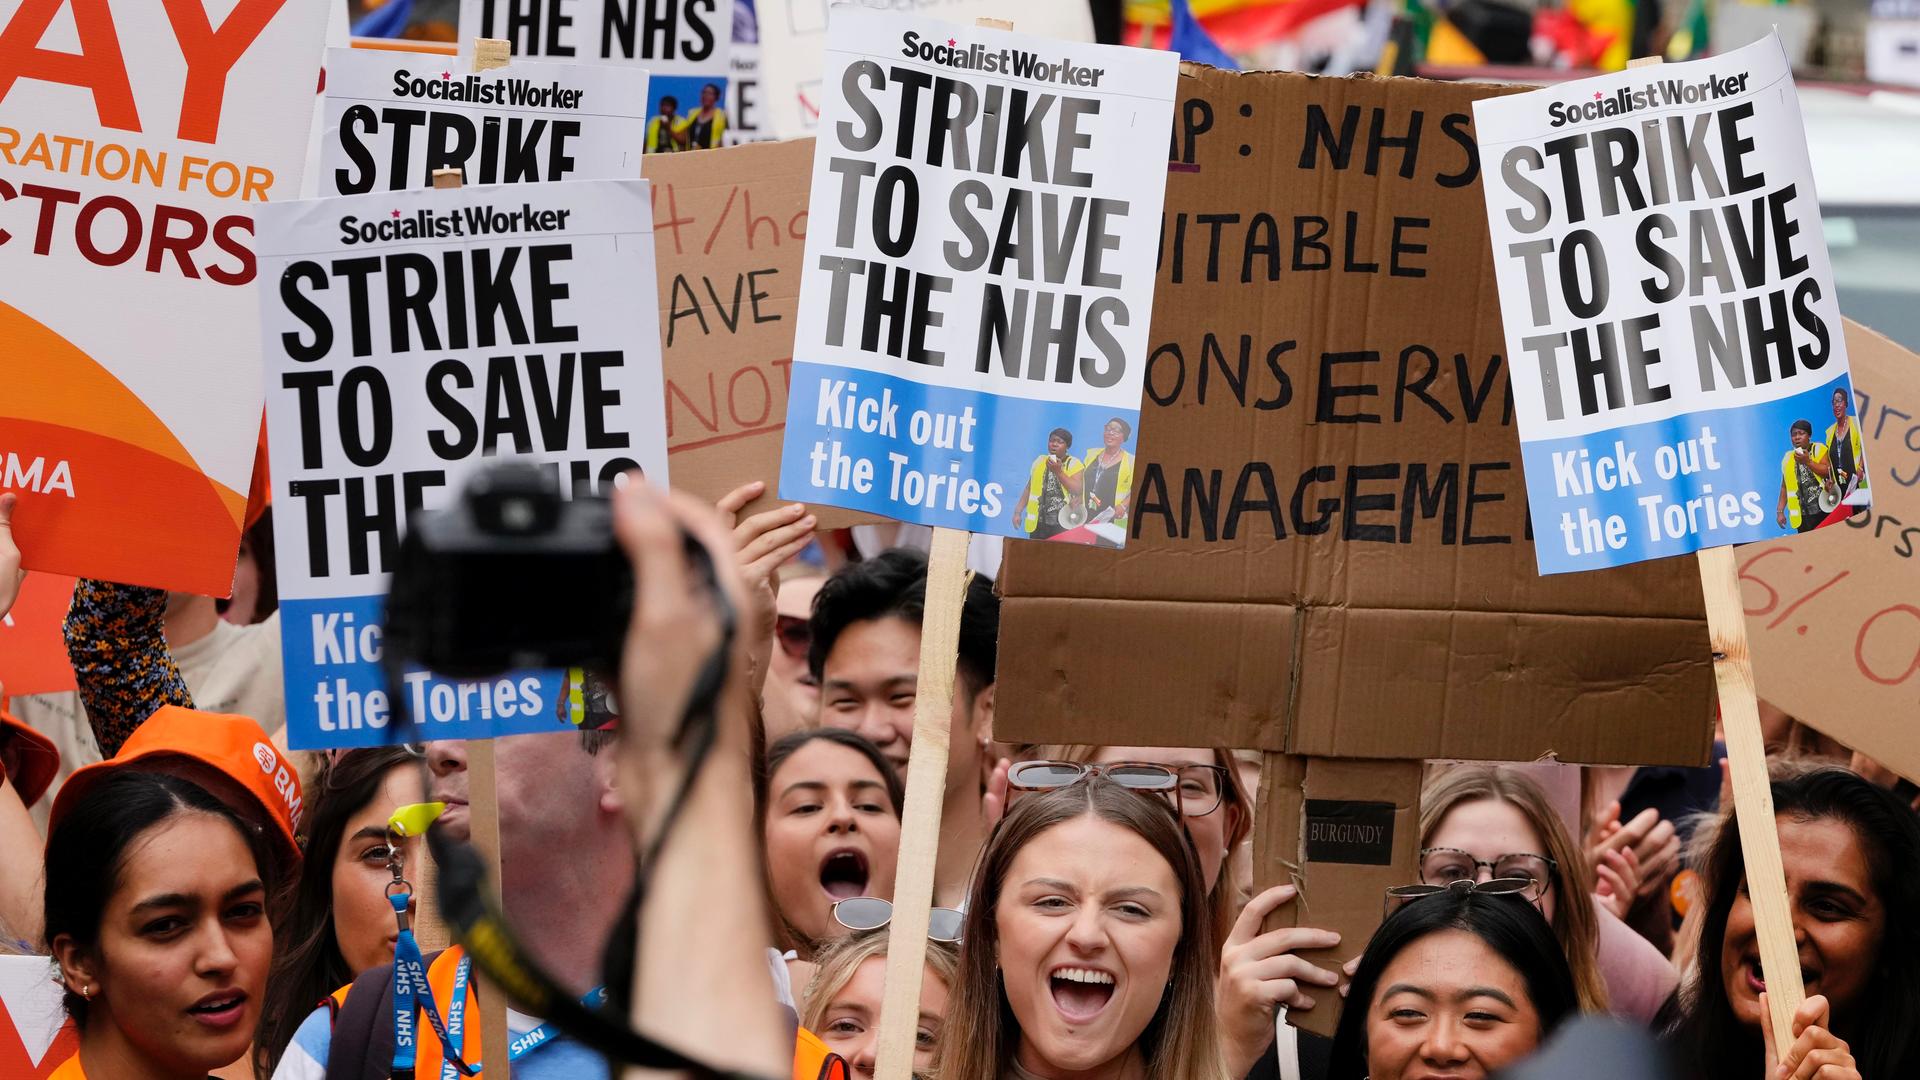 crowd of people holding signs with commentary about Britain's NHS